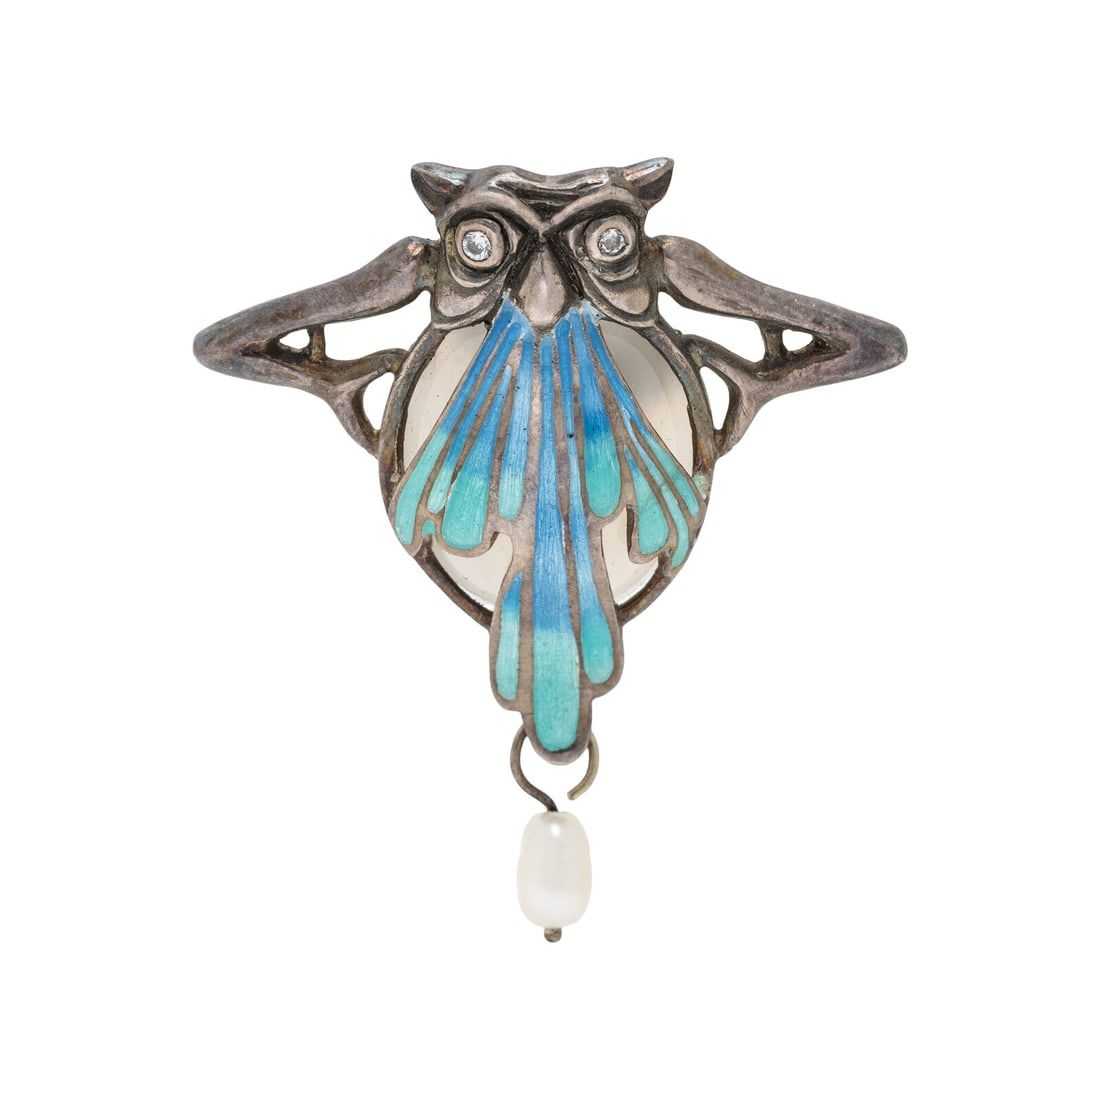 Art Nouveau owl-form pin in silver and enamel after a design by Czech artist Alphonse Mucha and bearing a ‘Mucha’ stamp, estimated at $300-$500 at Freeman’s Hindman.